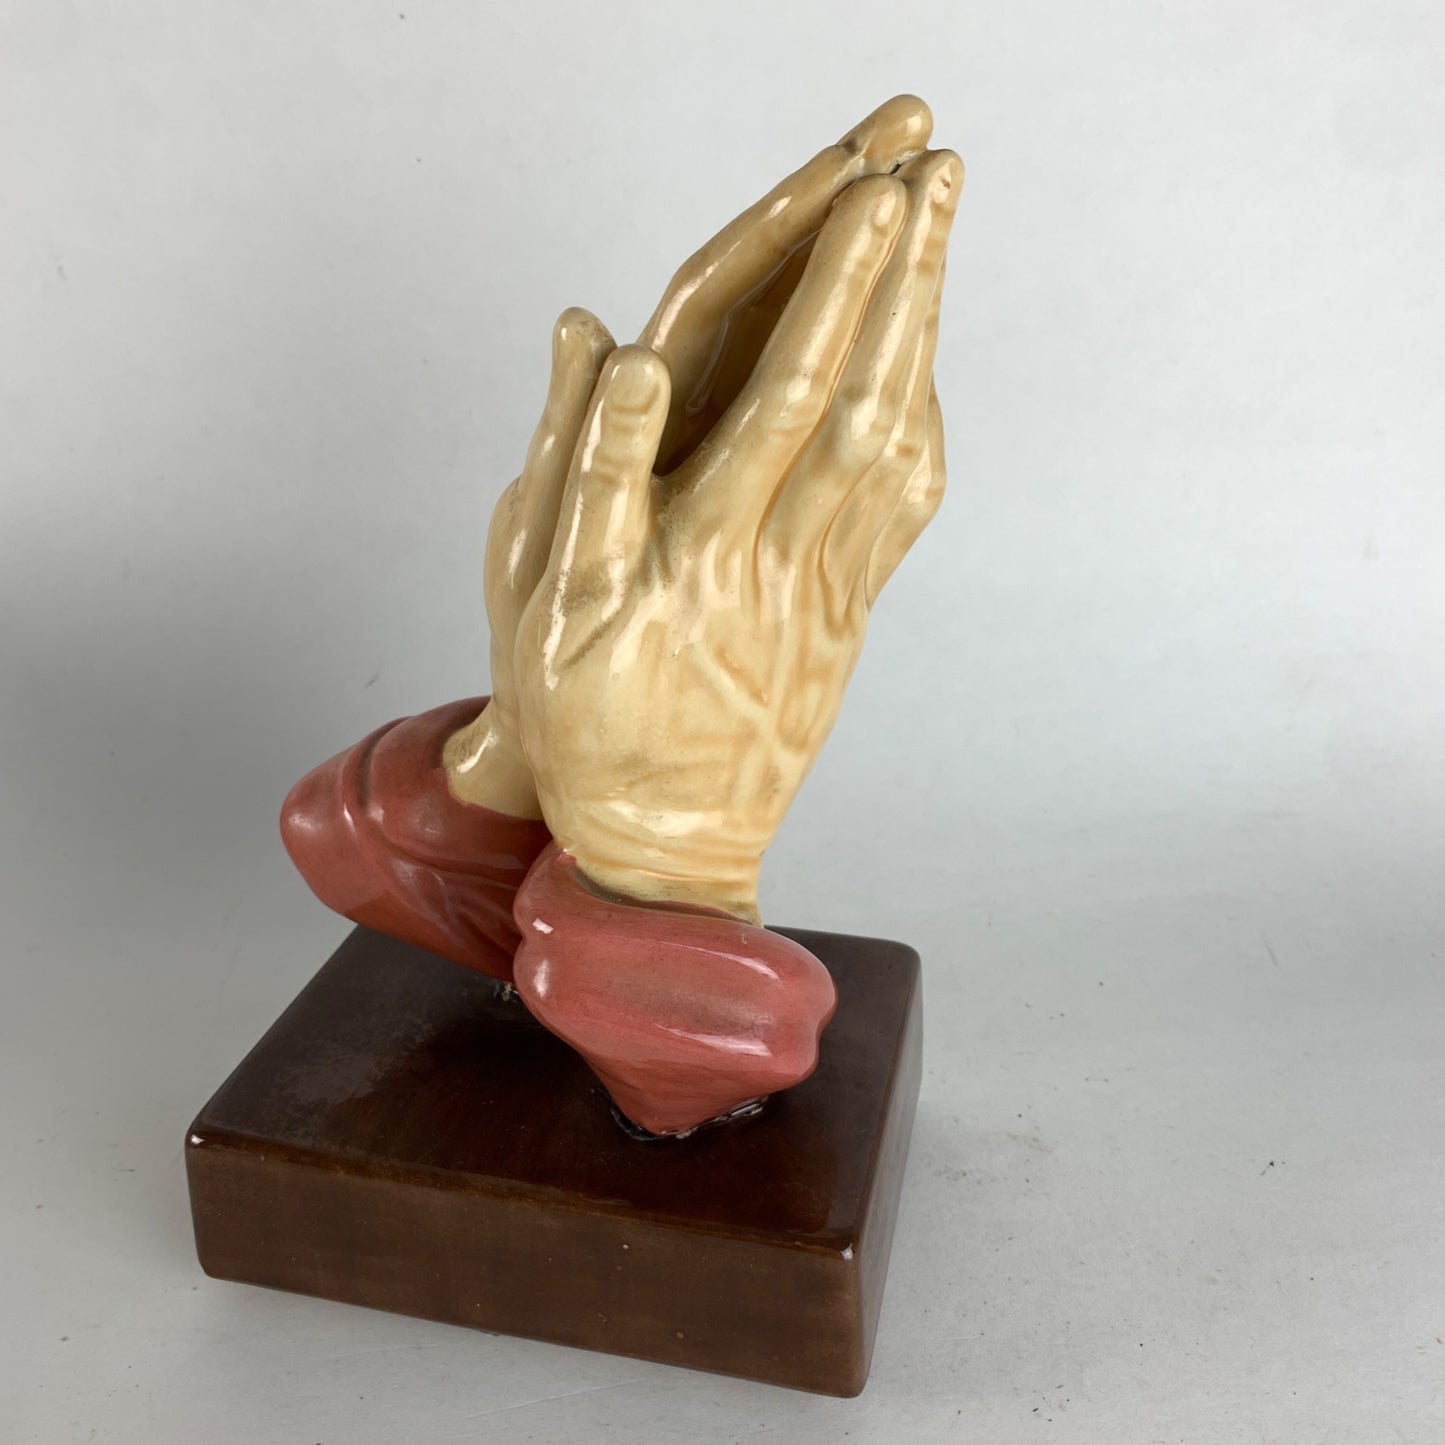 Atlantic Mold Co. Praying Hands Sculpture Painted